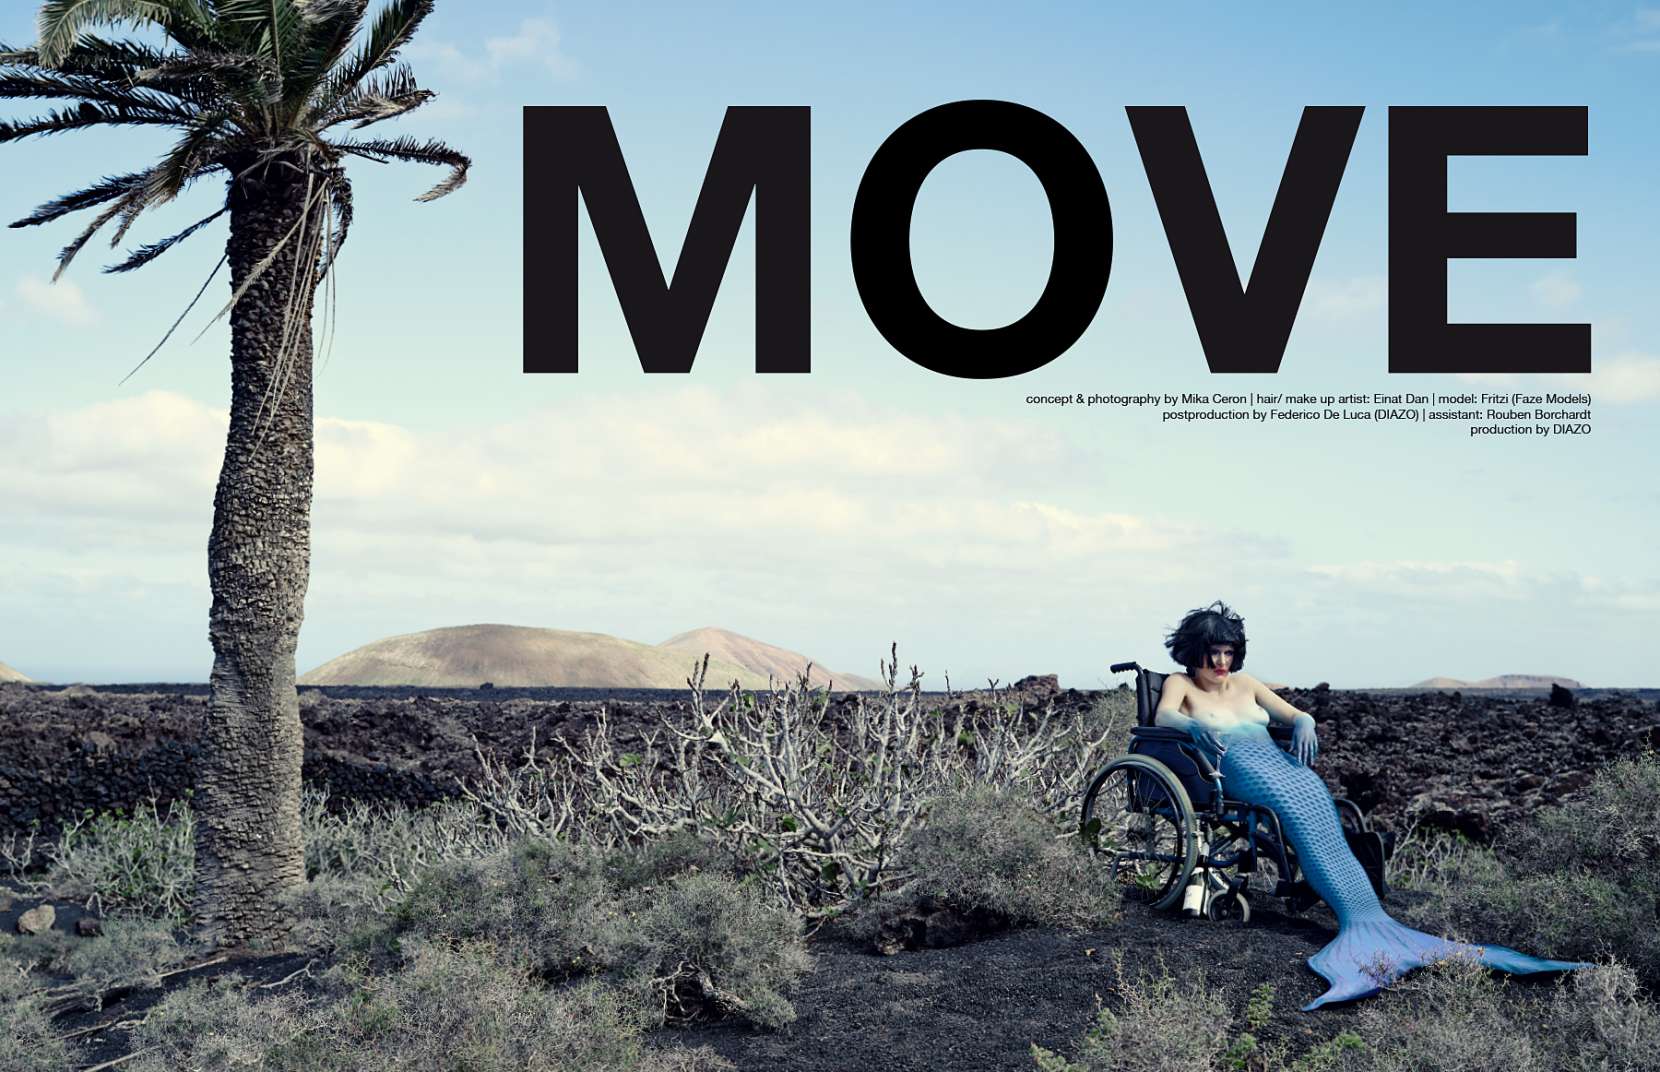 editorial_MOVE_photographed_by_Mika_Ceron-1-1660x1072.jpg